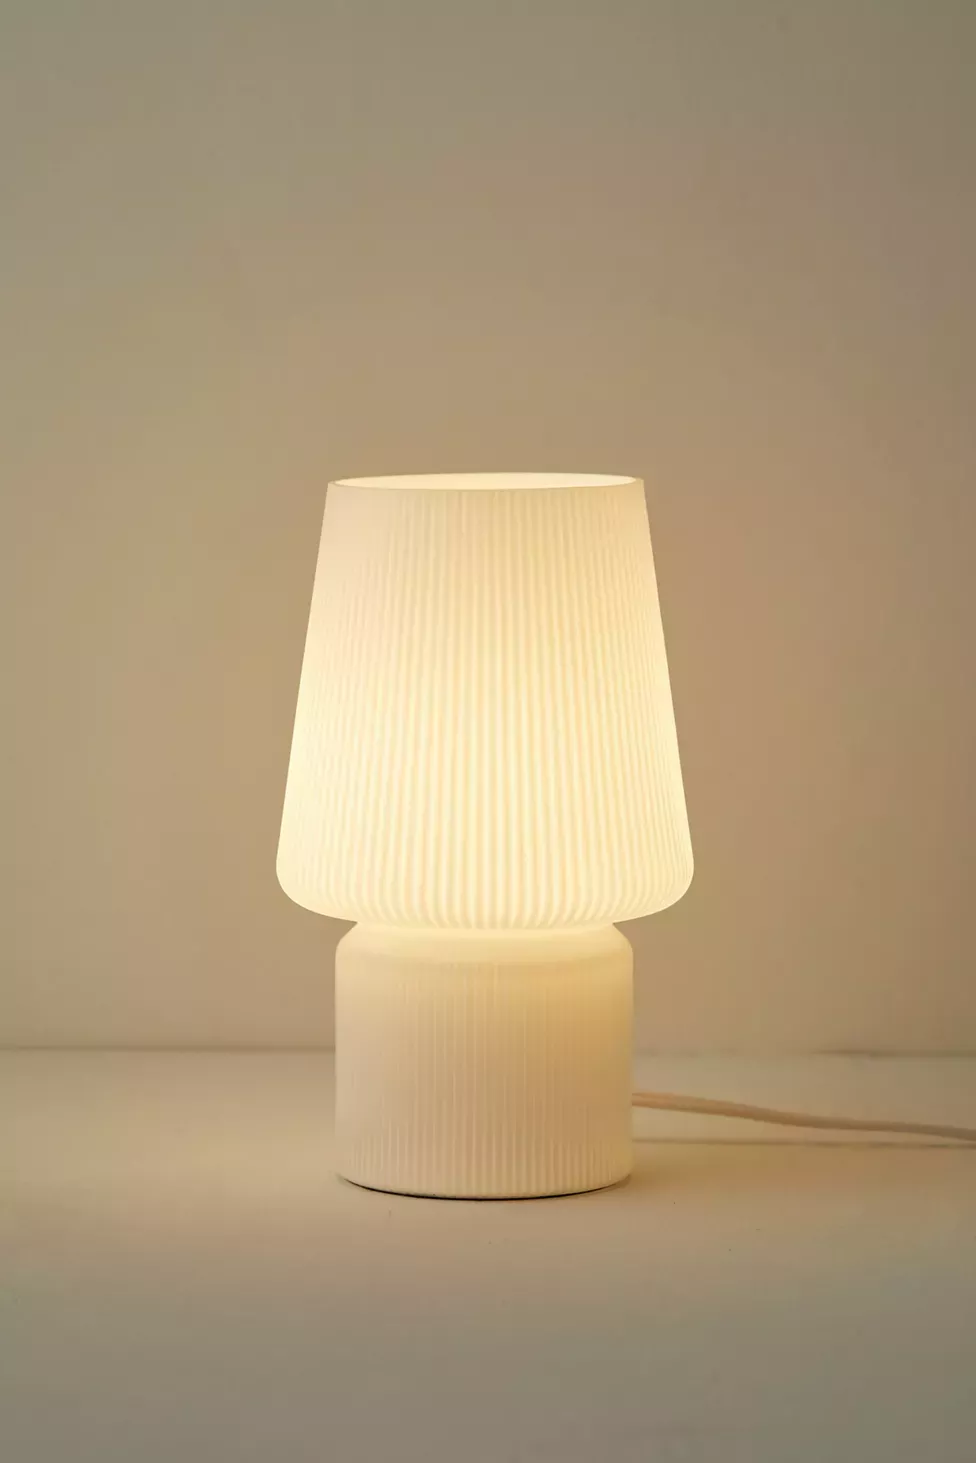 Elevate Your Bedroom Decor with Stylish
Table Lamps